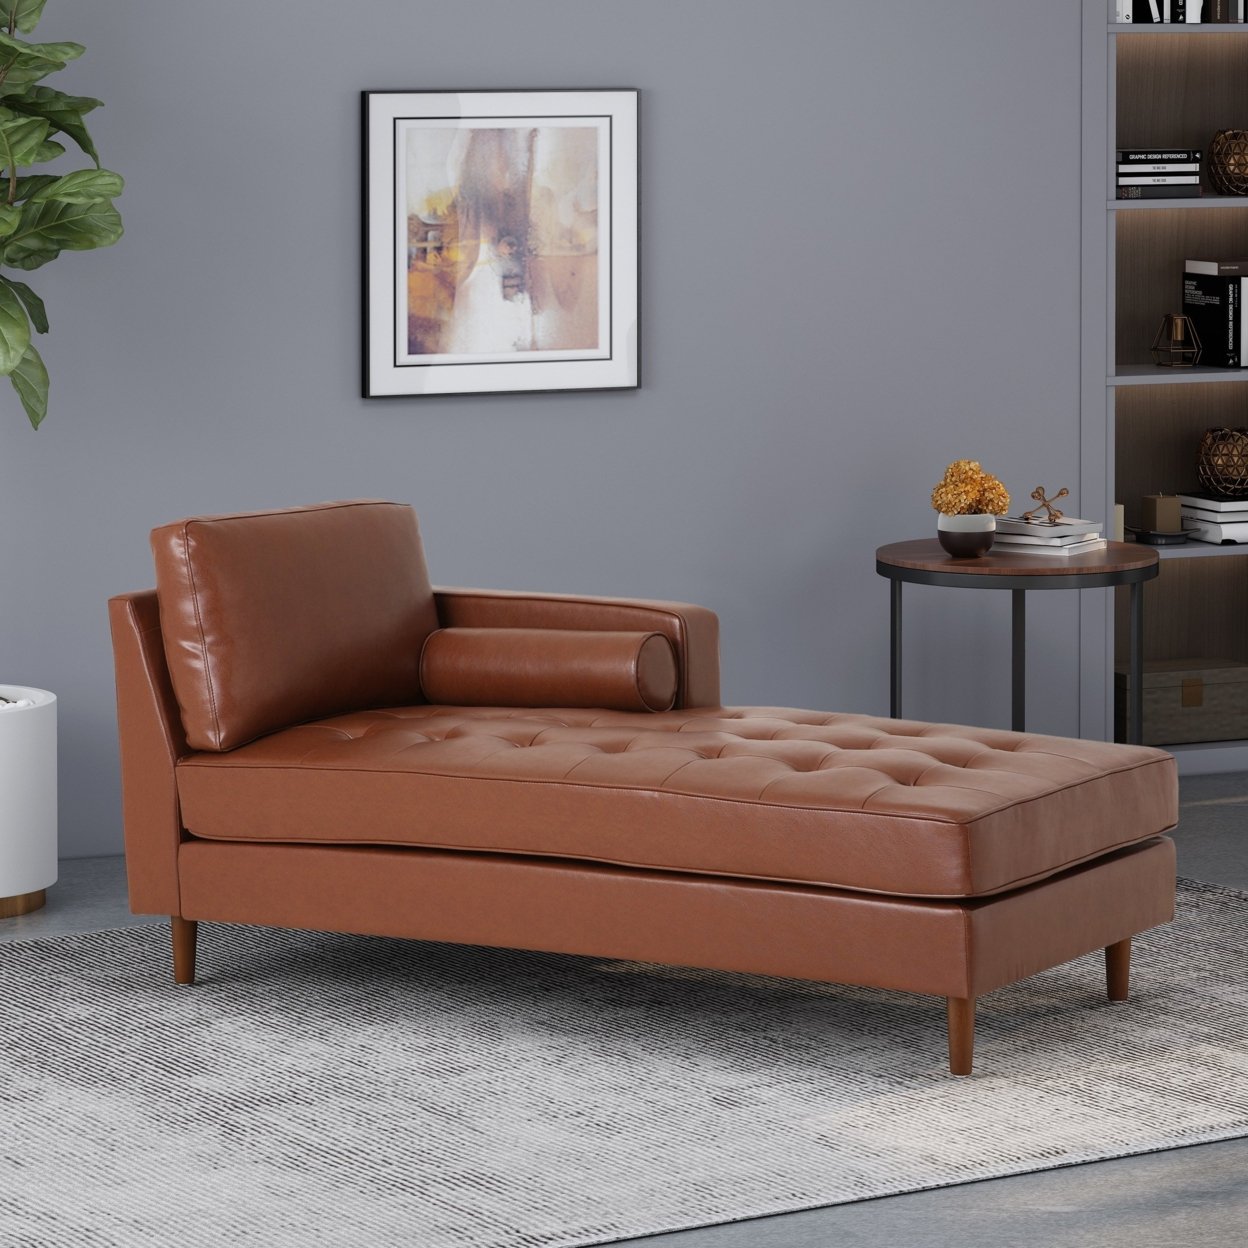 Hixon Contemporary Tufted Upholstered Chaise Lounge - Espresso/cognac